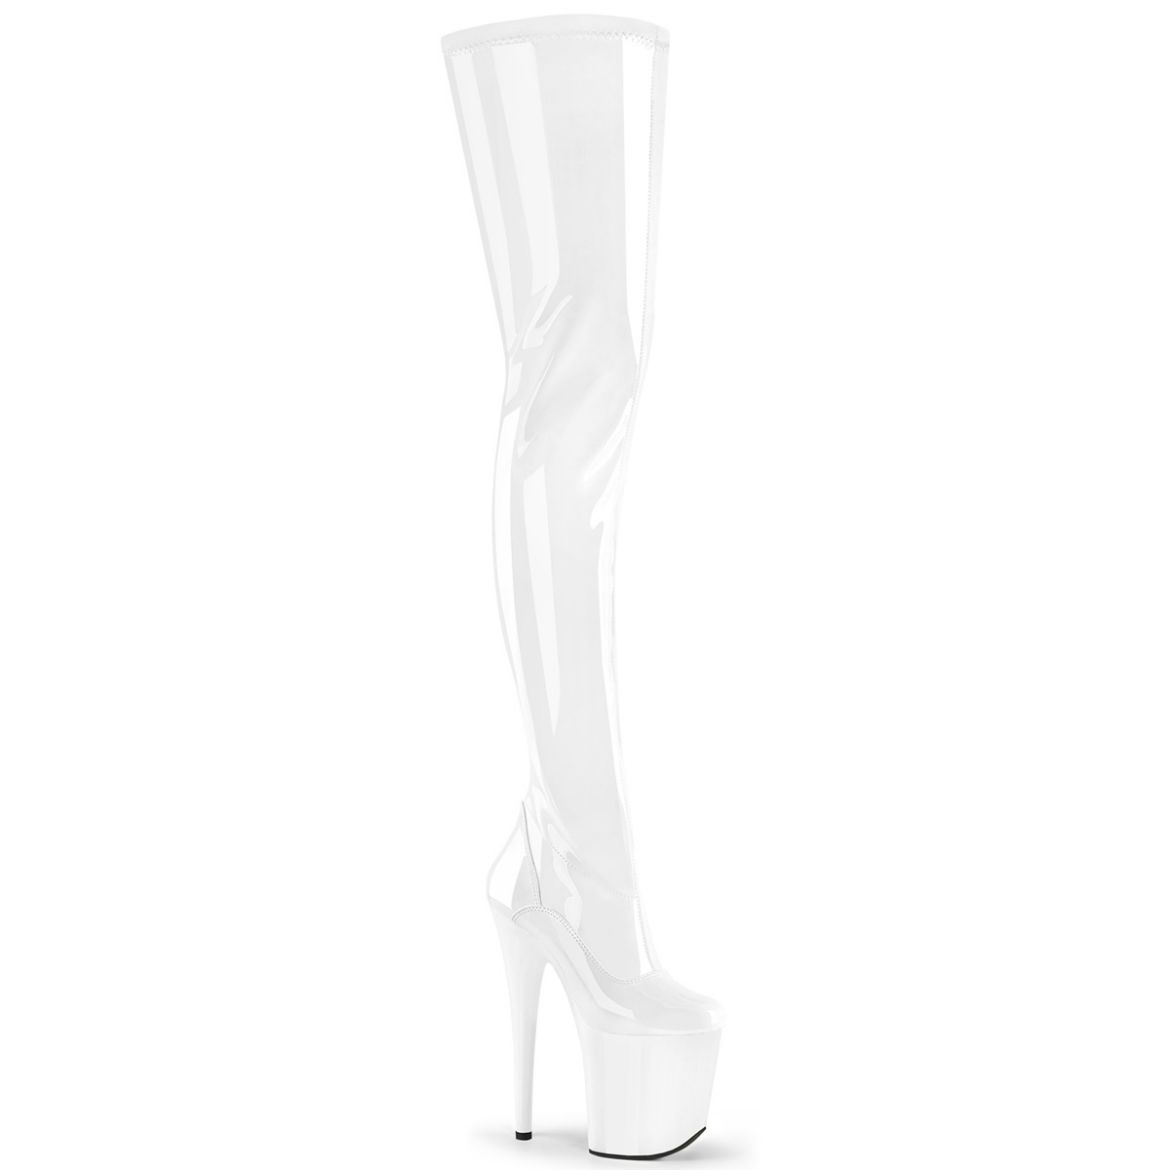 Product image of Pleaser FLAMINGO-4000 Wht Str. Pat/Wht 8 Inch Heel 4 Inch PF Stretch Crotch Boot Side Zip